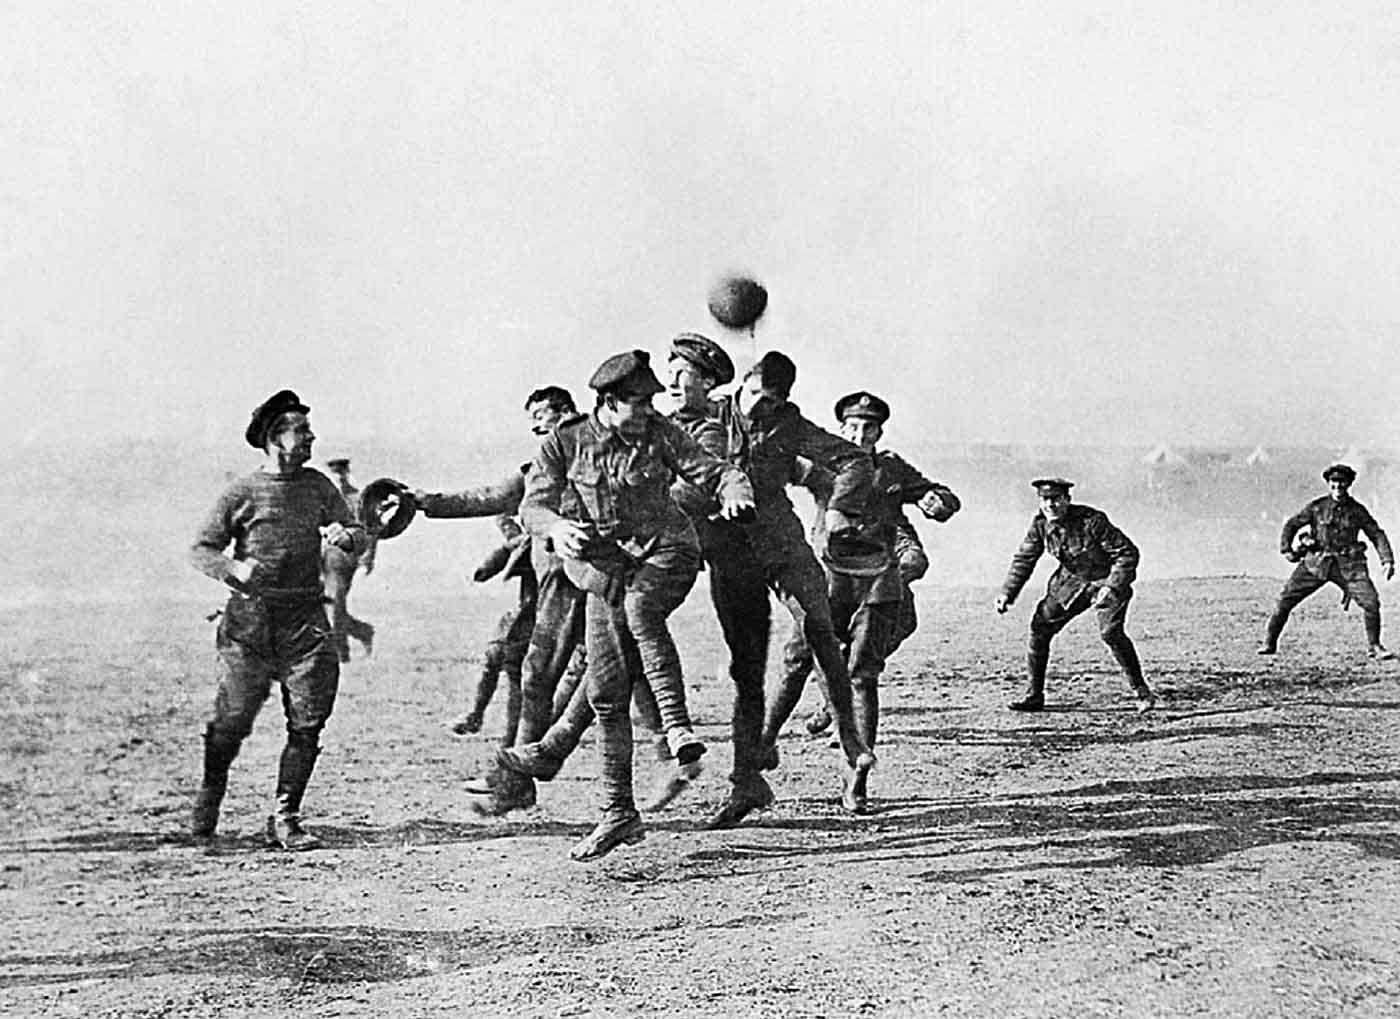 Christmas truce between Britain and Germany WW1, 1914